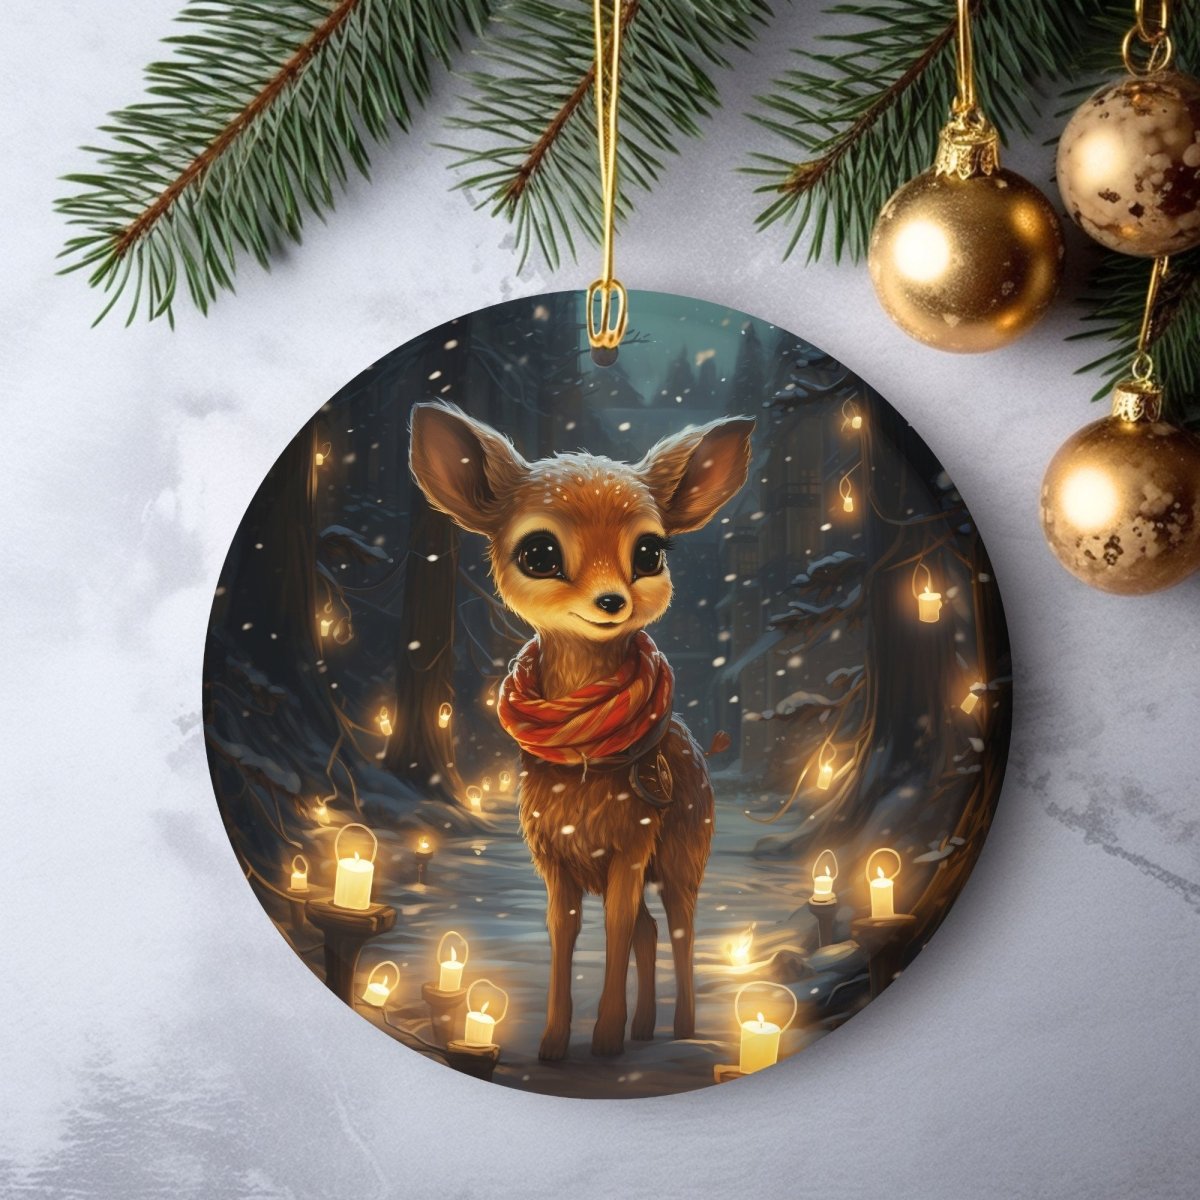 Christmas Animal Ornament 20 PNG Bundle Sublimation Design Festive Round Stickers Stylish 3D Effect Round Christmas Decoration Clipart - Everything Pixel